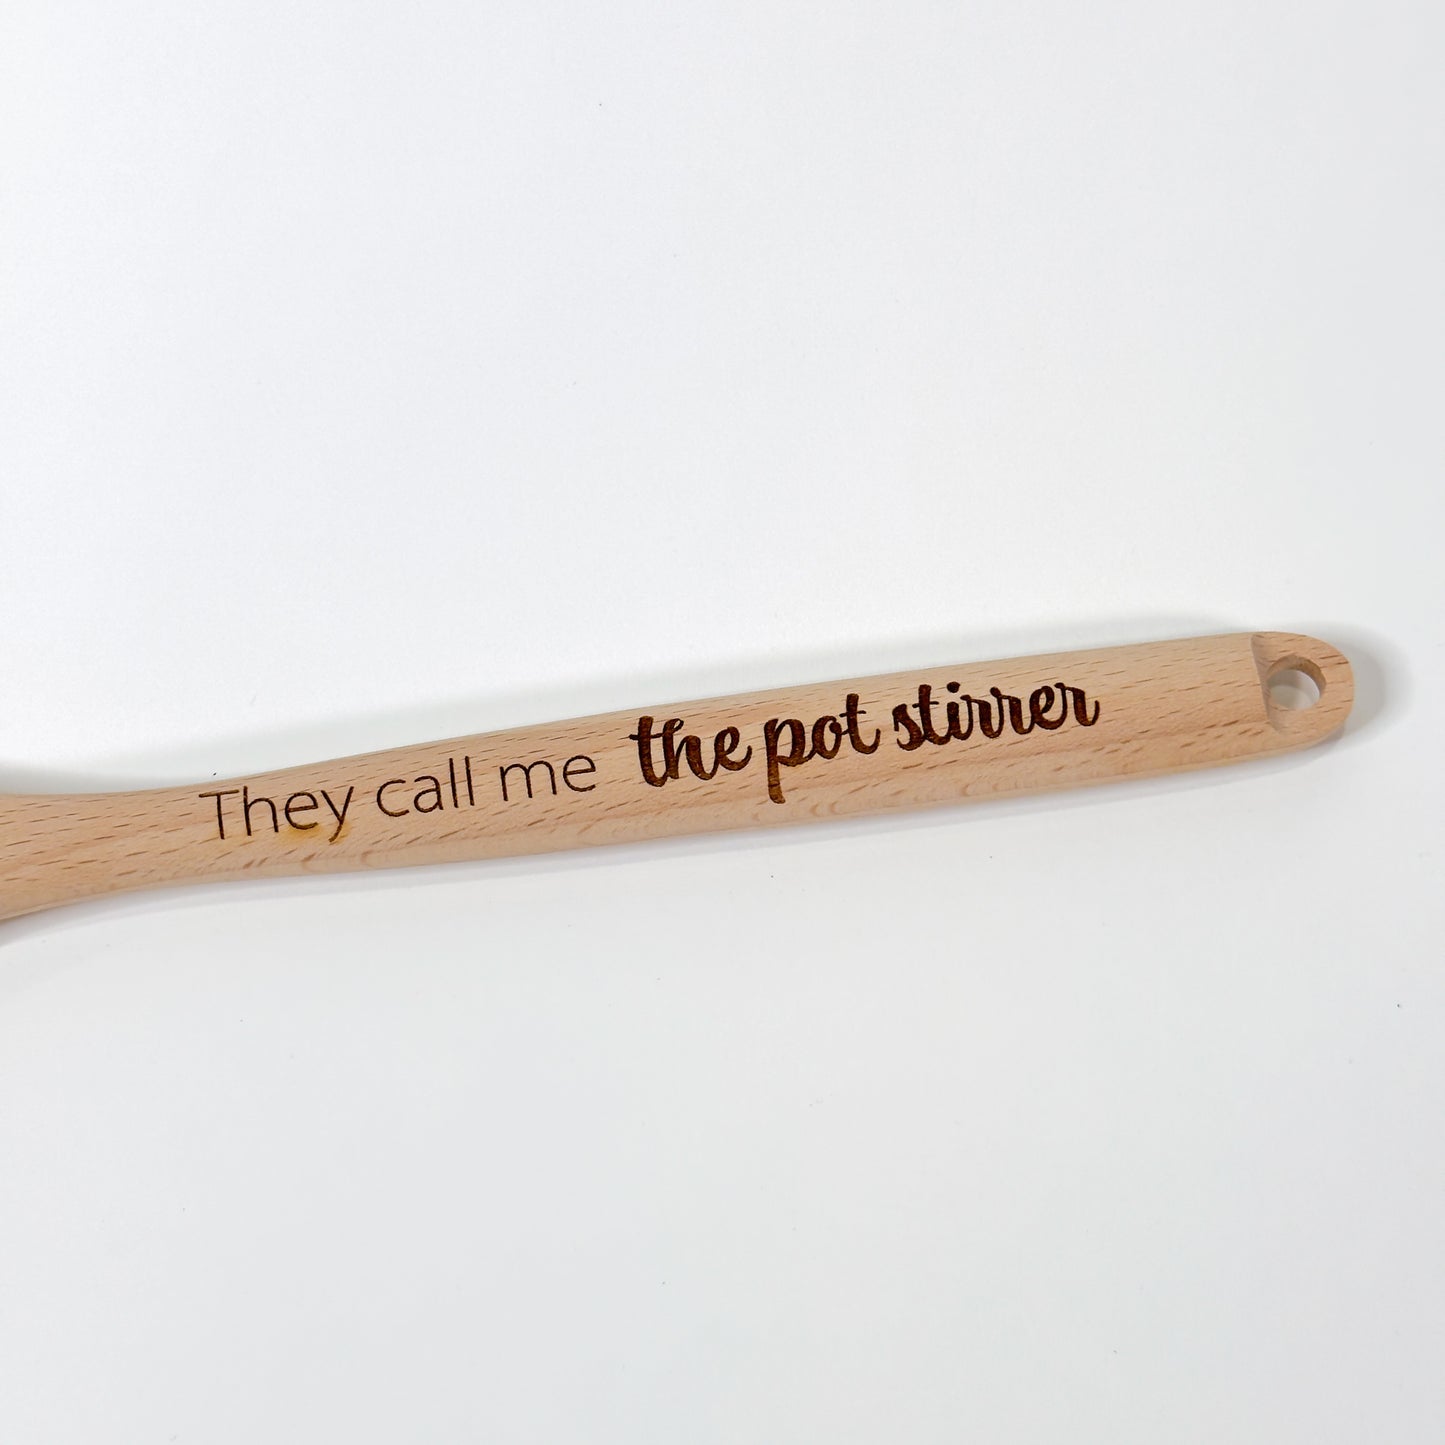 Engraved Wood Spoon, "The call me the pot stirrer"